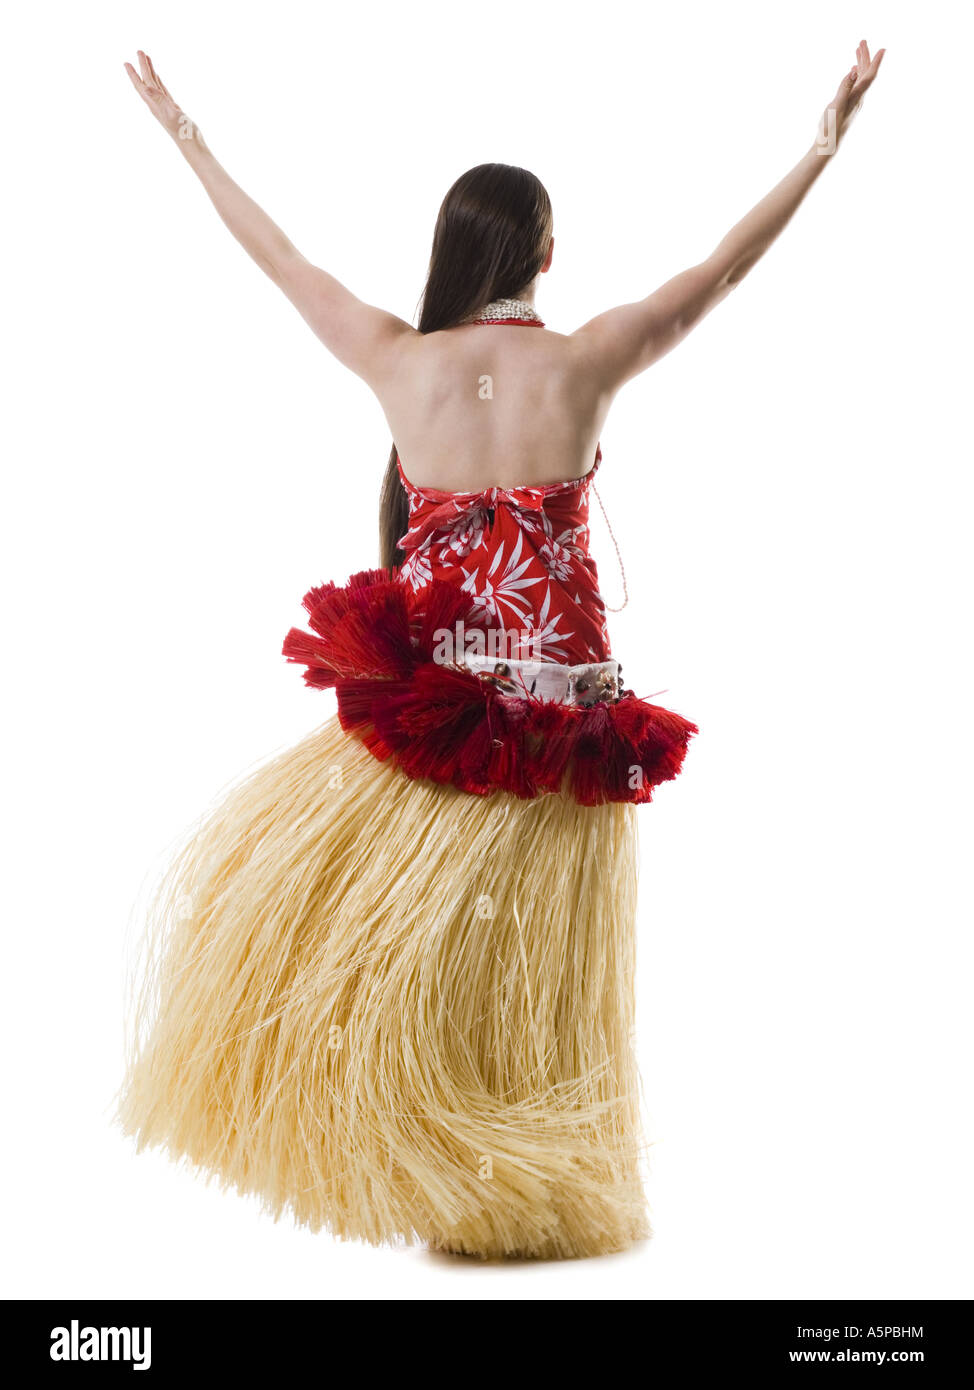 Grass Skirt Stock Photos and Pictures - 23,467 Images